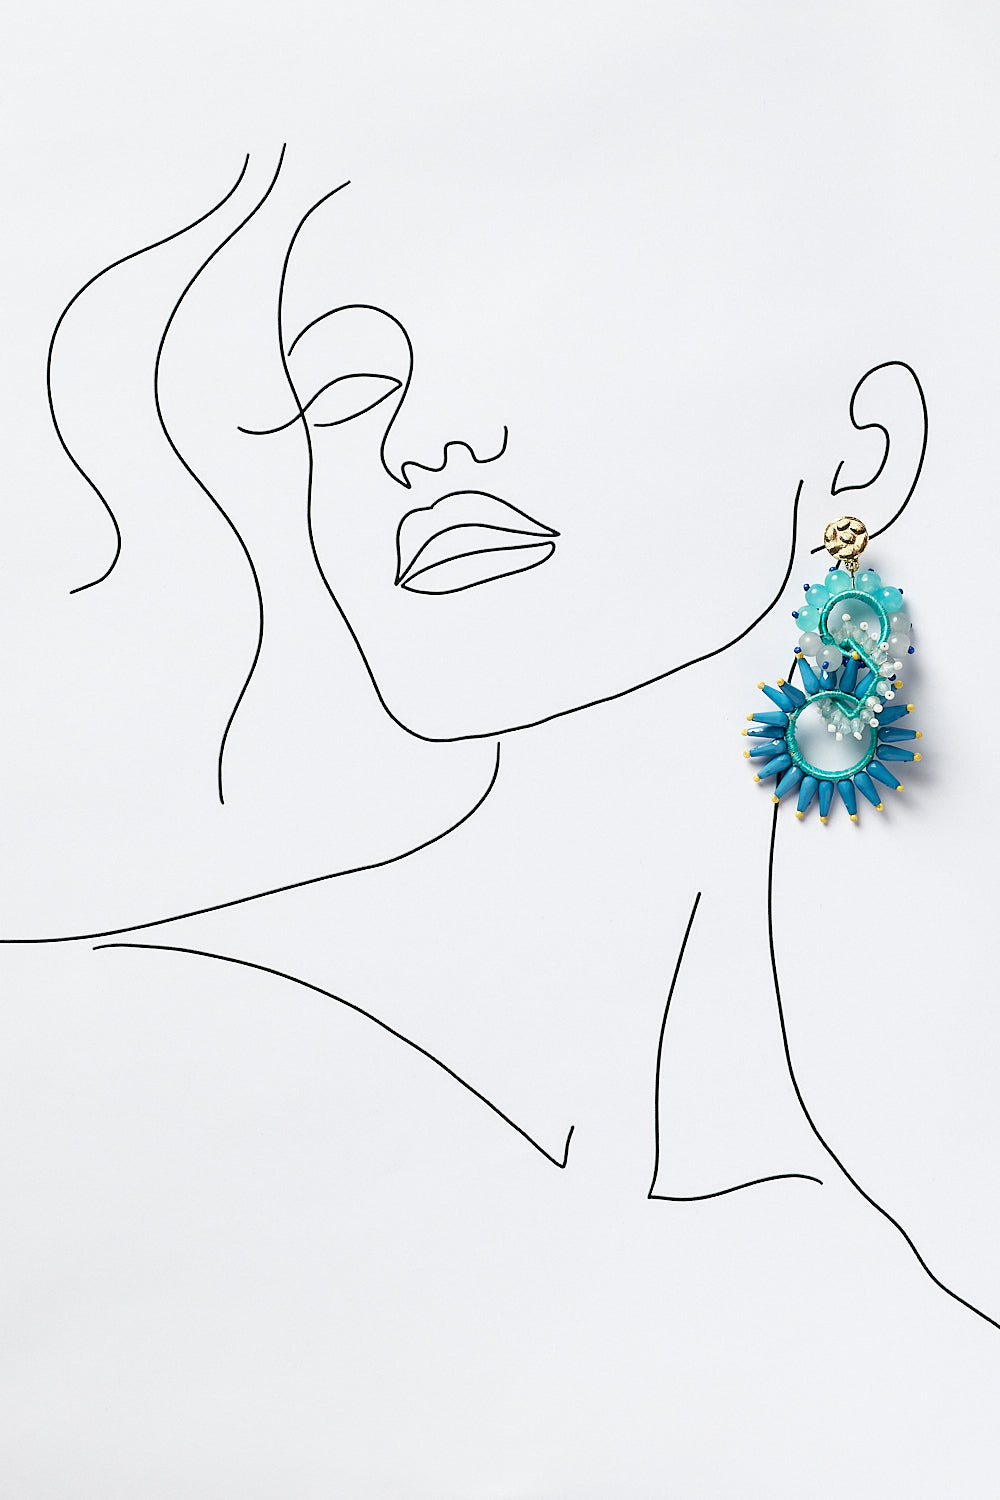 Briella Beaded Earring in Blue and Green